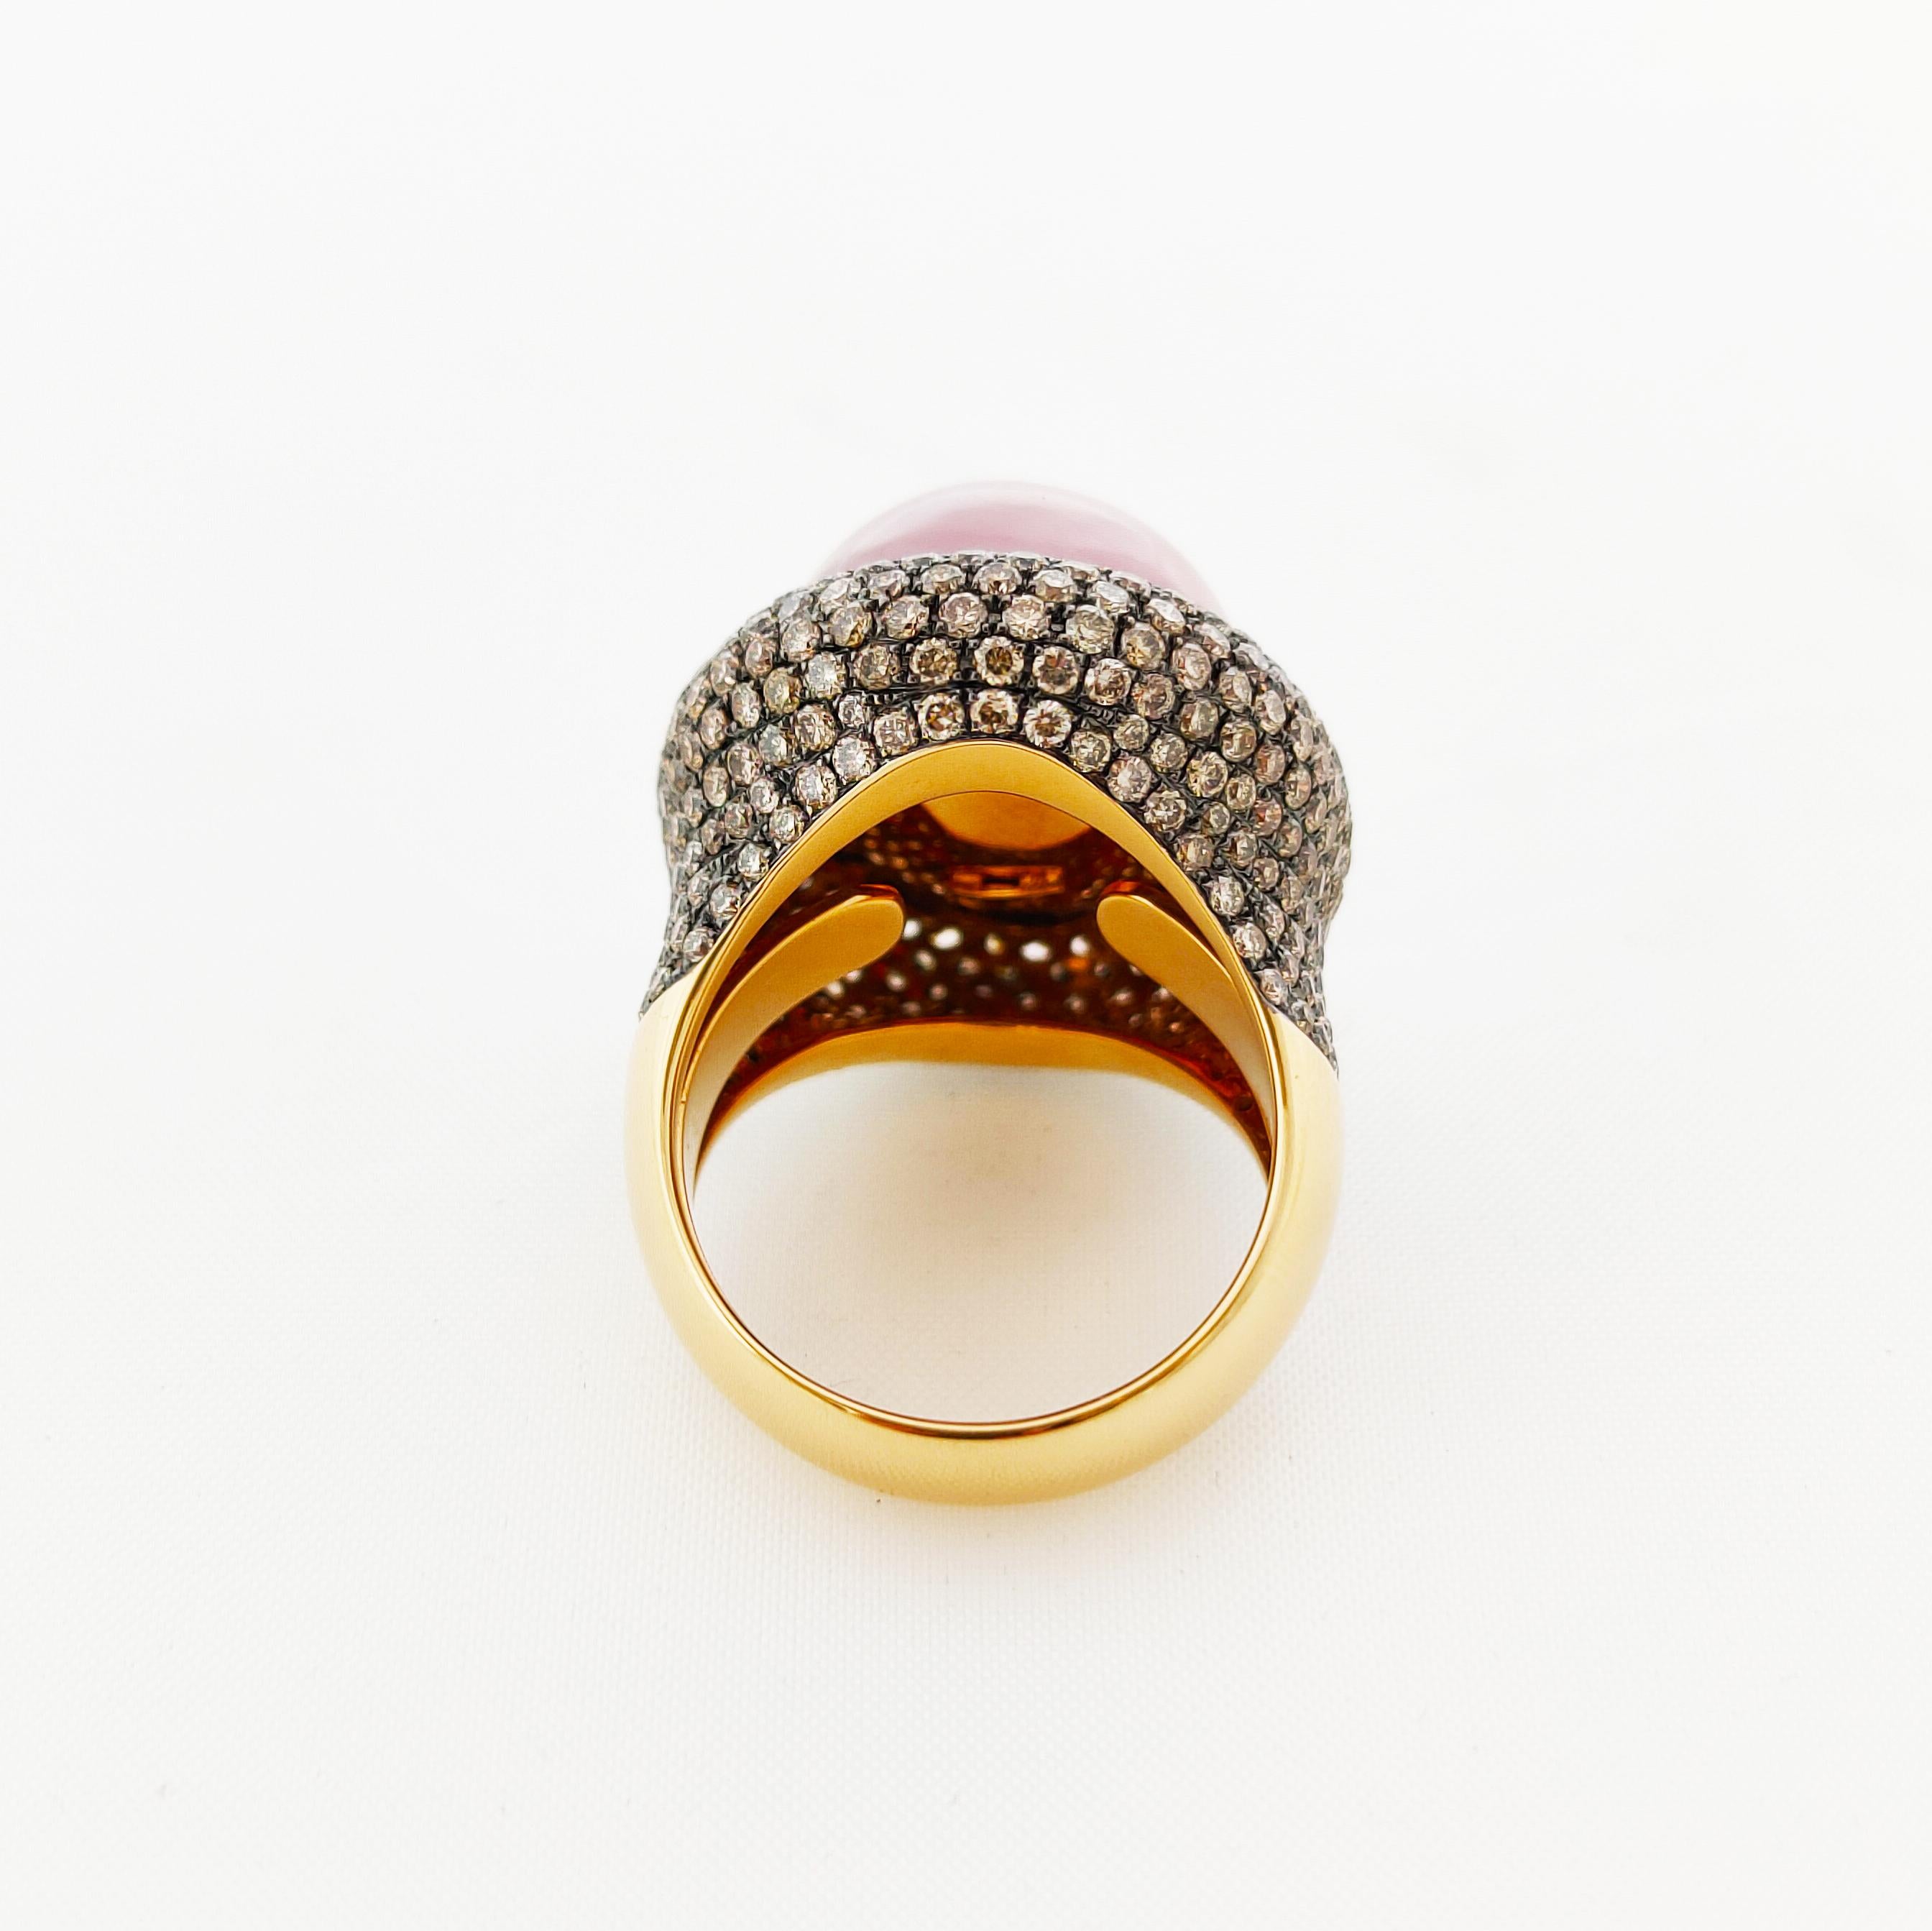 Women's Bespoke One-of-a-Kind Cocktail Ring with Rose Quartz and Diamonds For Sale